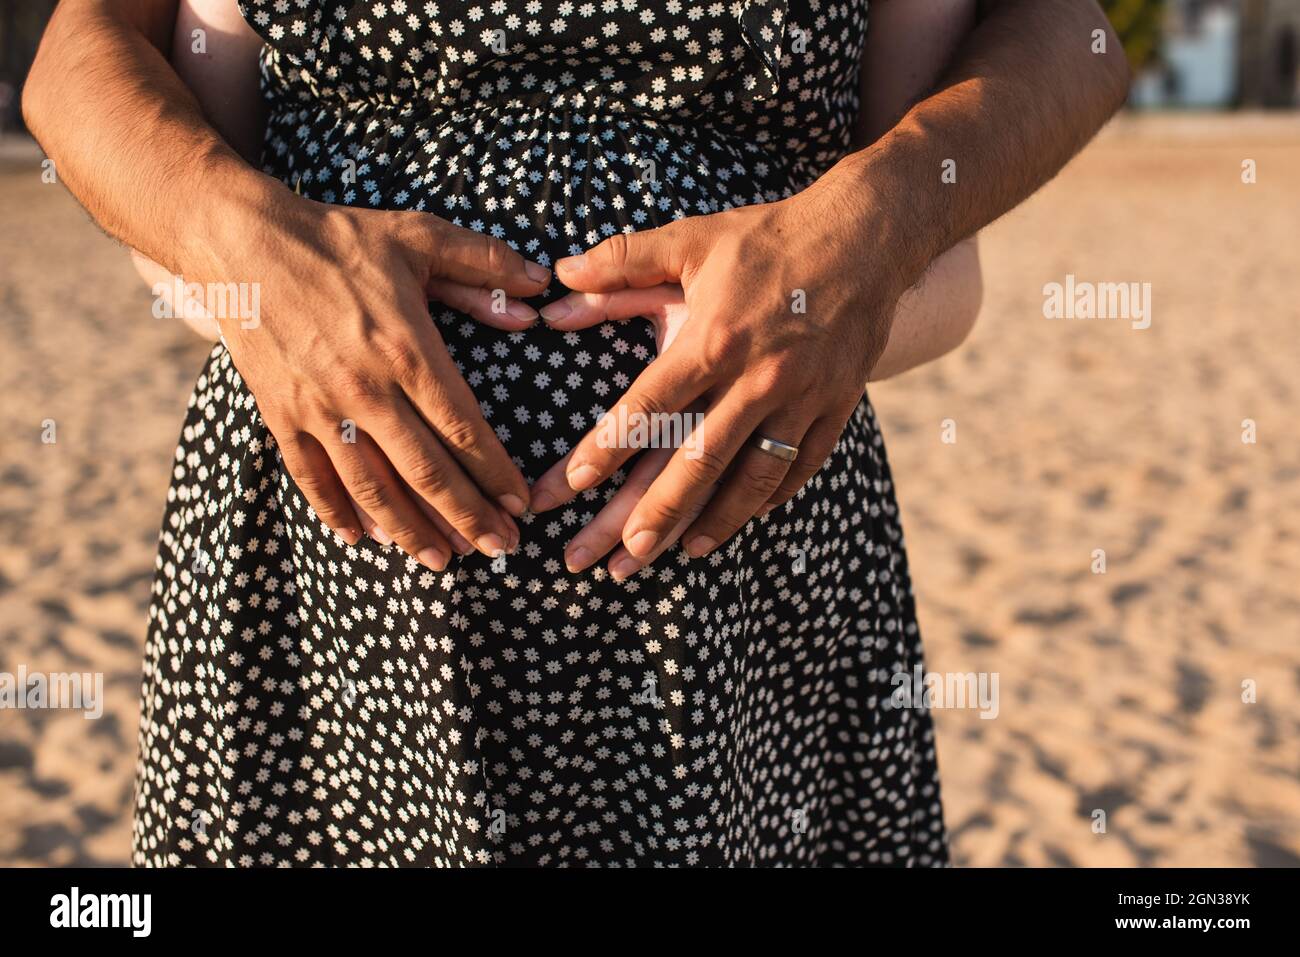 Interracial couple expecting a baby. Heart with hands on the belly of the pregnant woman. Stock Photo